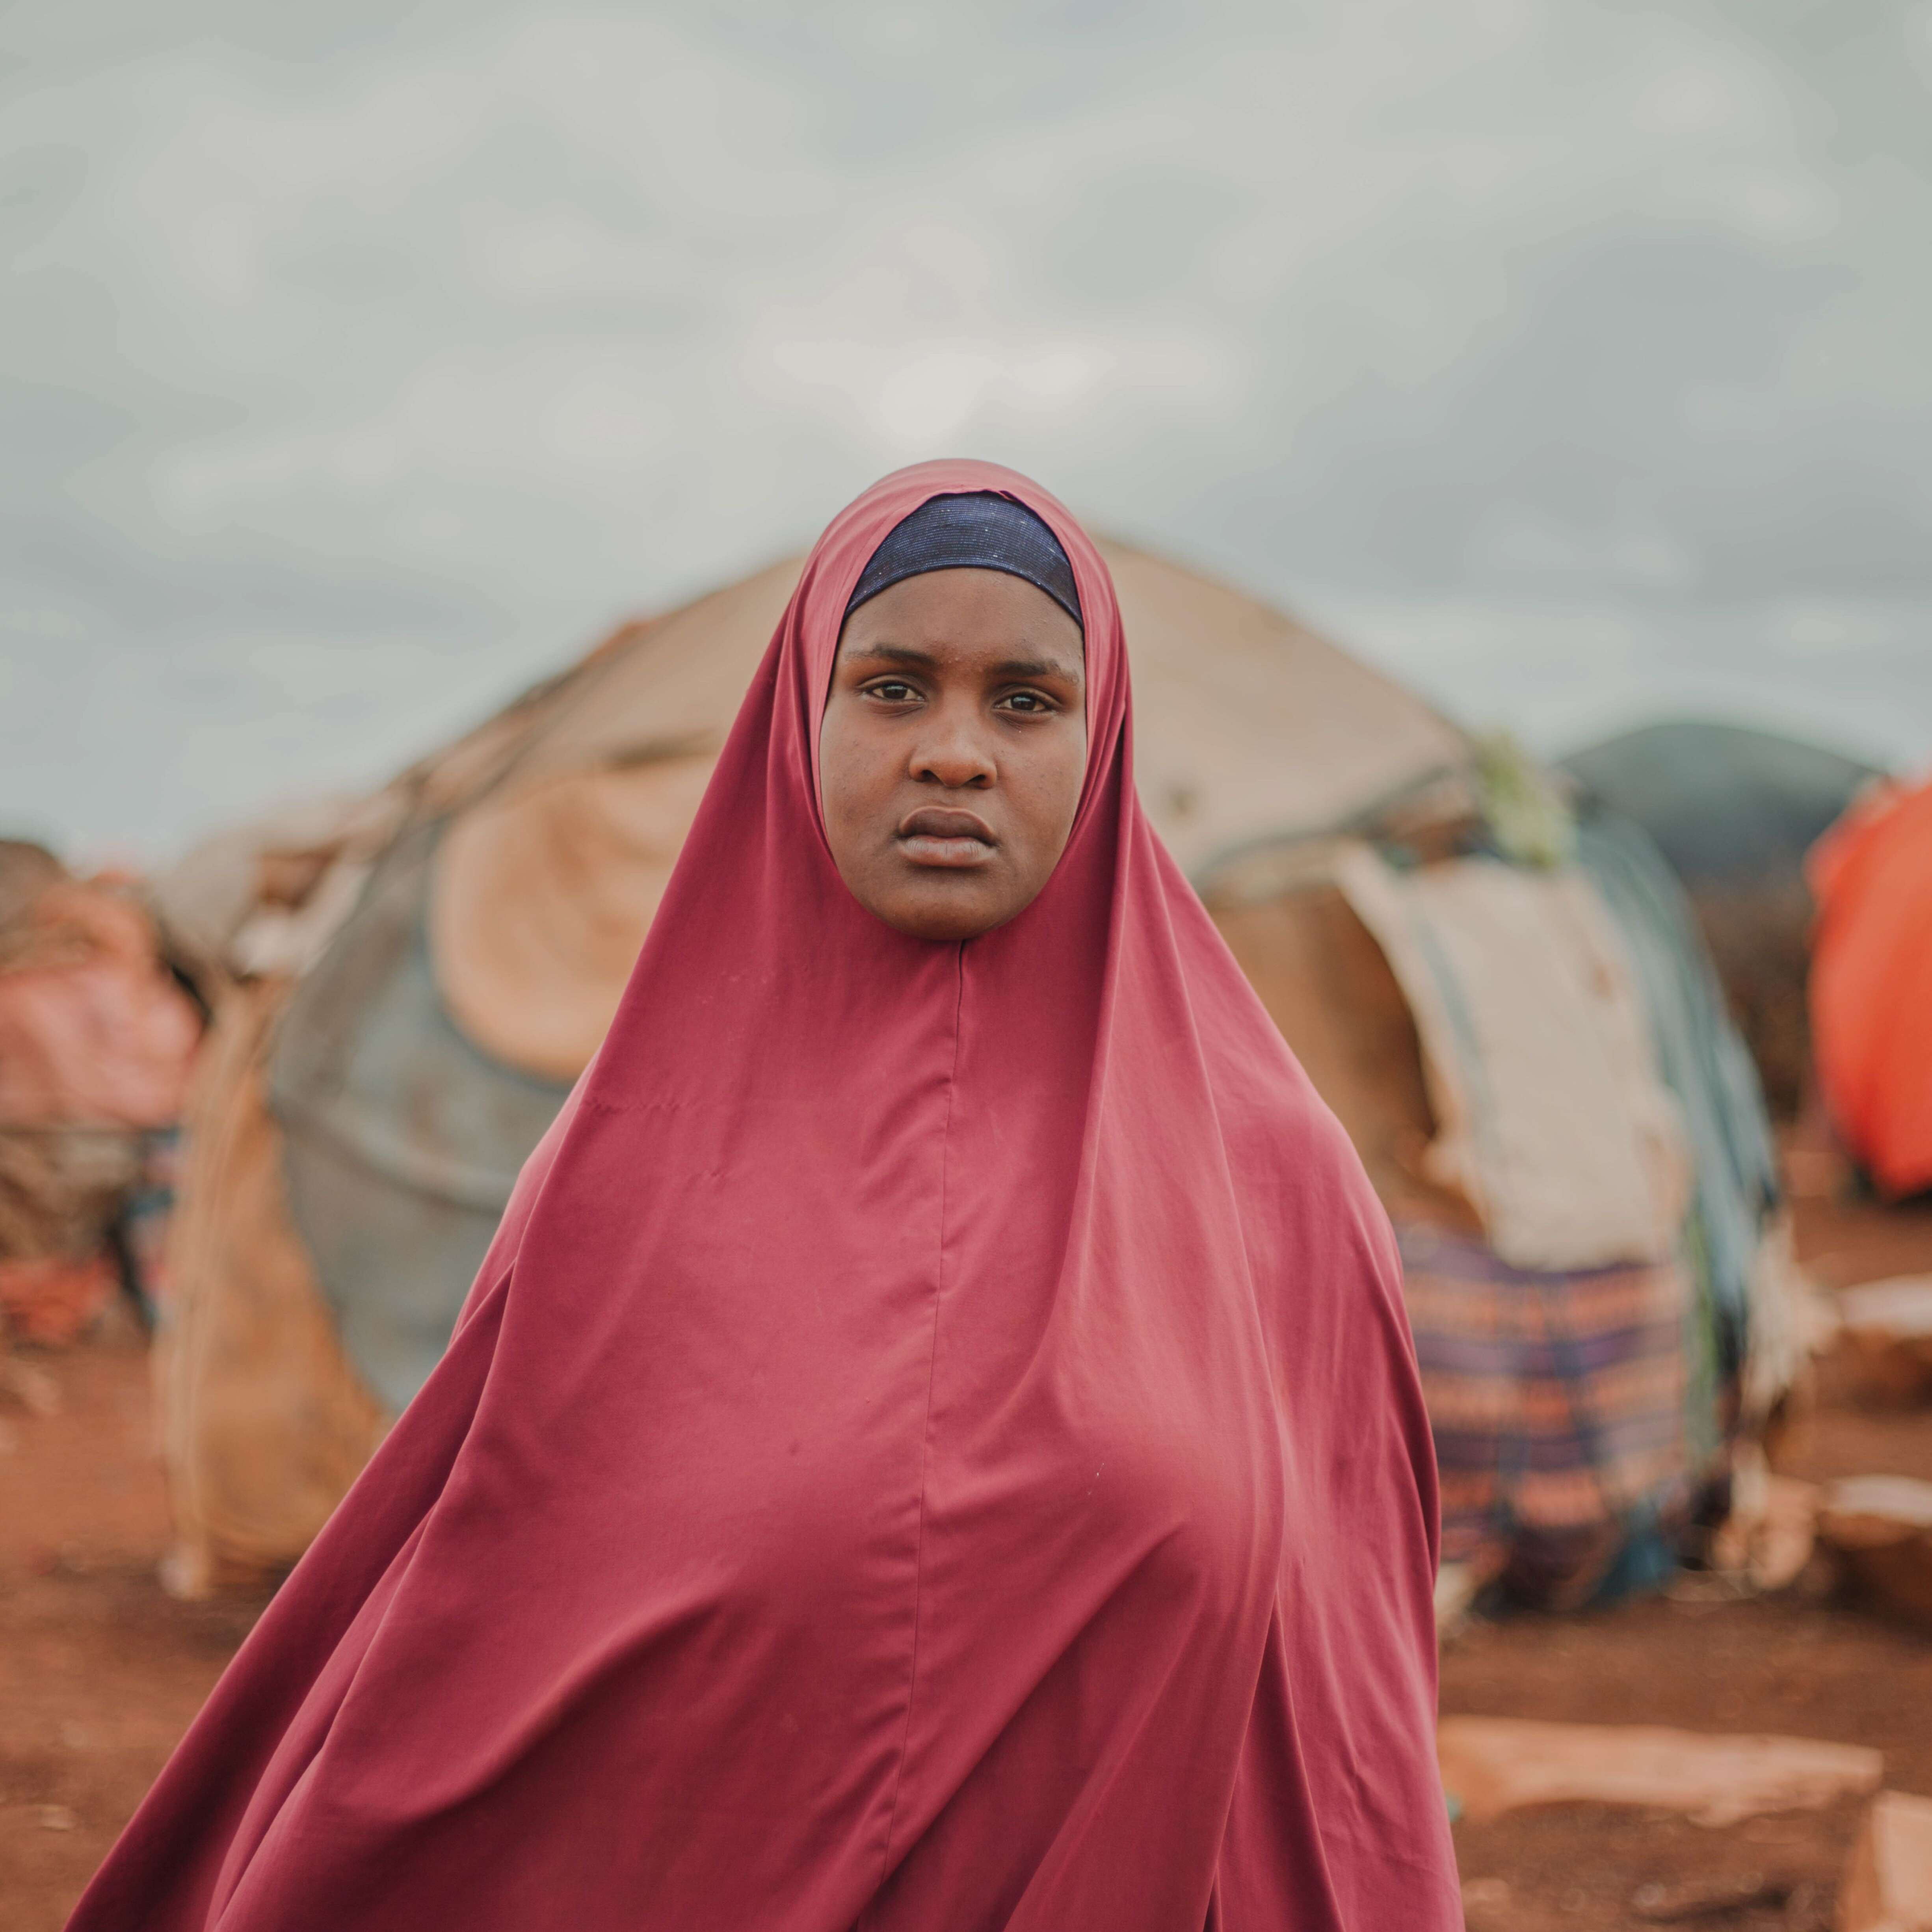 Amina, a refugee living in Somalia, standing in front of an internally displaced persons camp